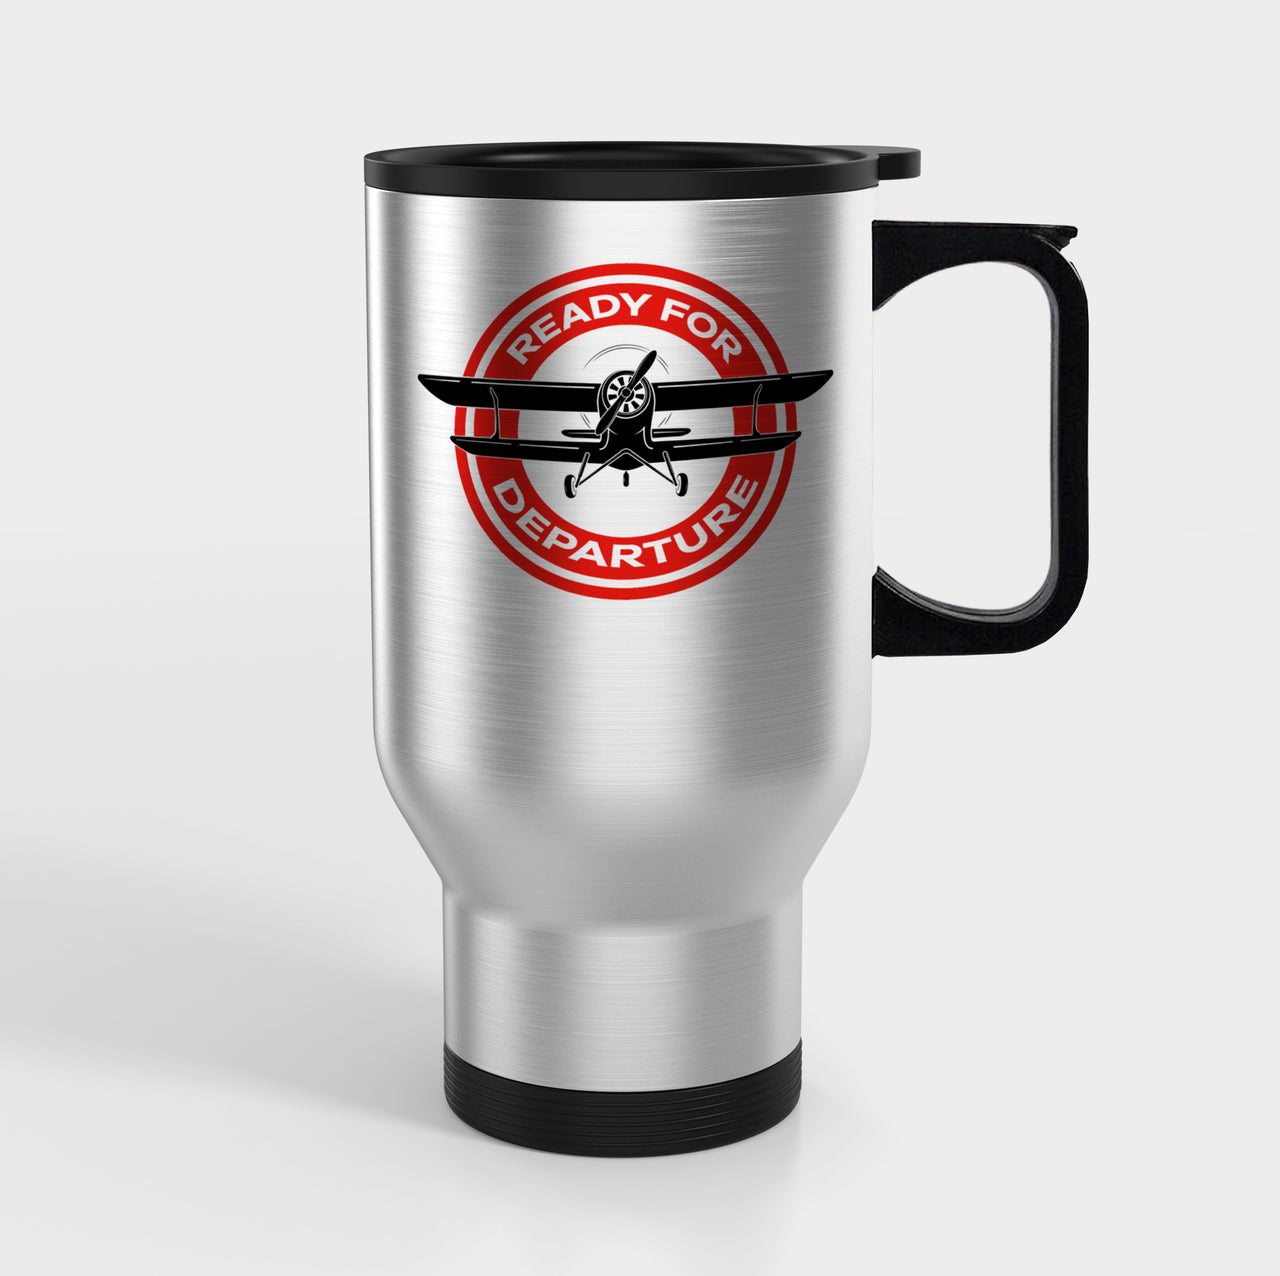 Ready for Departure Designed Travel Mugs (With Holder)